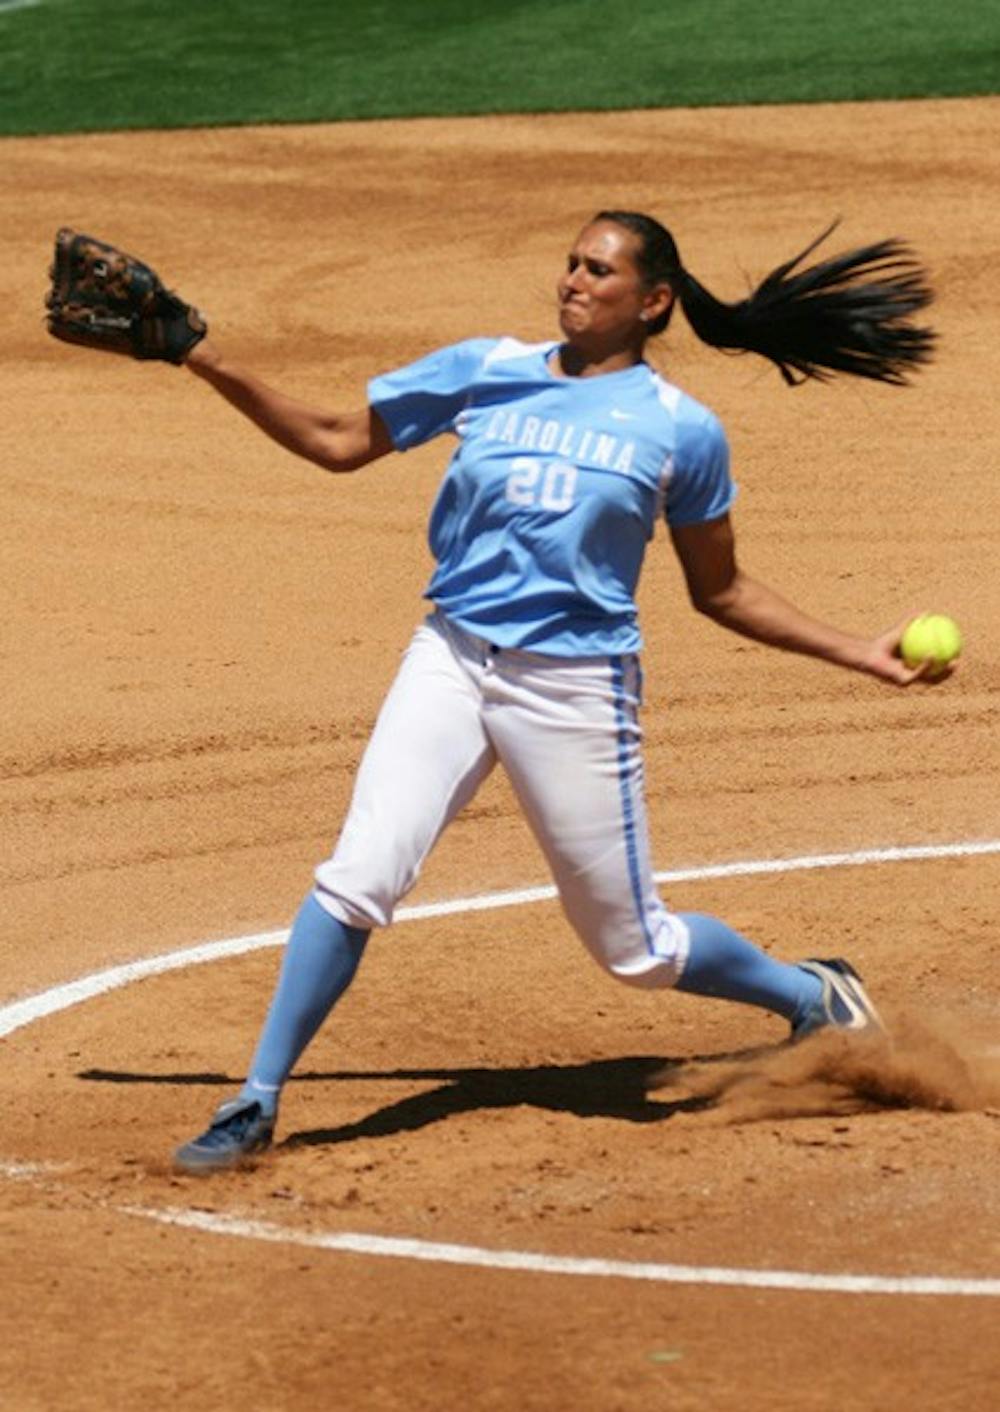 Senior Danielle Spaudling tossed seven innings of two-hit ball on Sunday. DTH/Duncan Culbreath